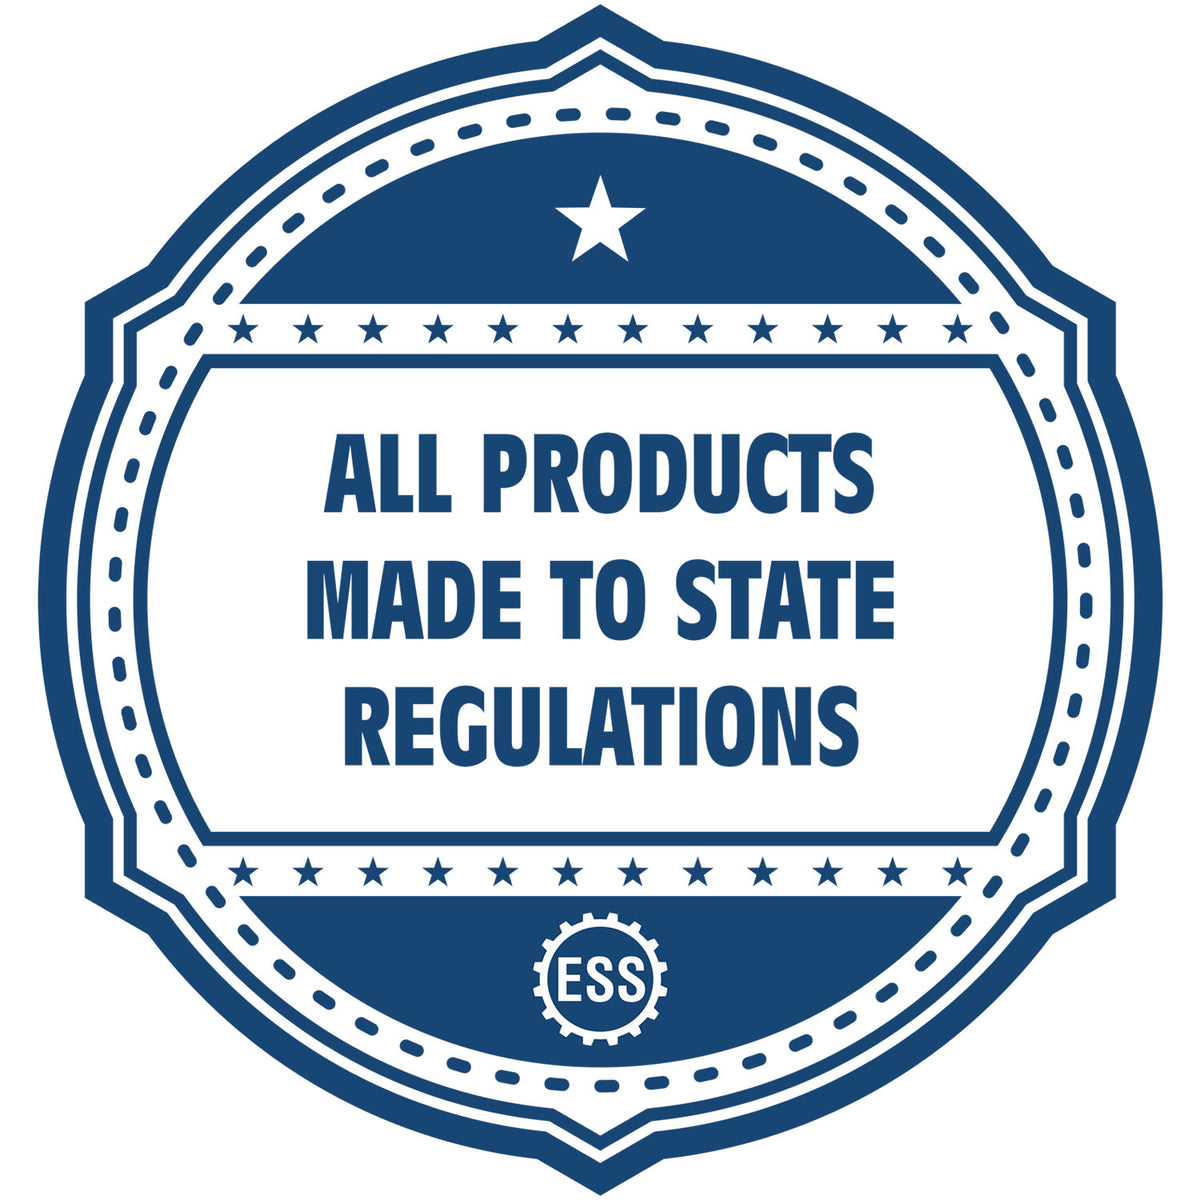 An icon or badge element for the Self-Inking Massachusetts Landscape Architect Stamp showing that this product is made in compliance with state regulations.